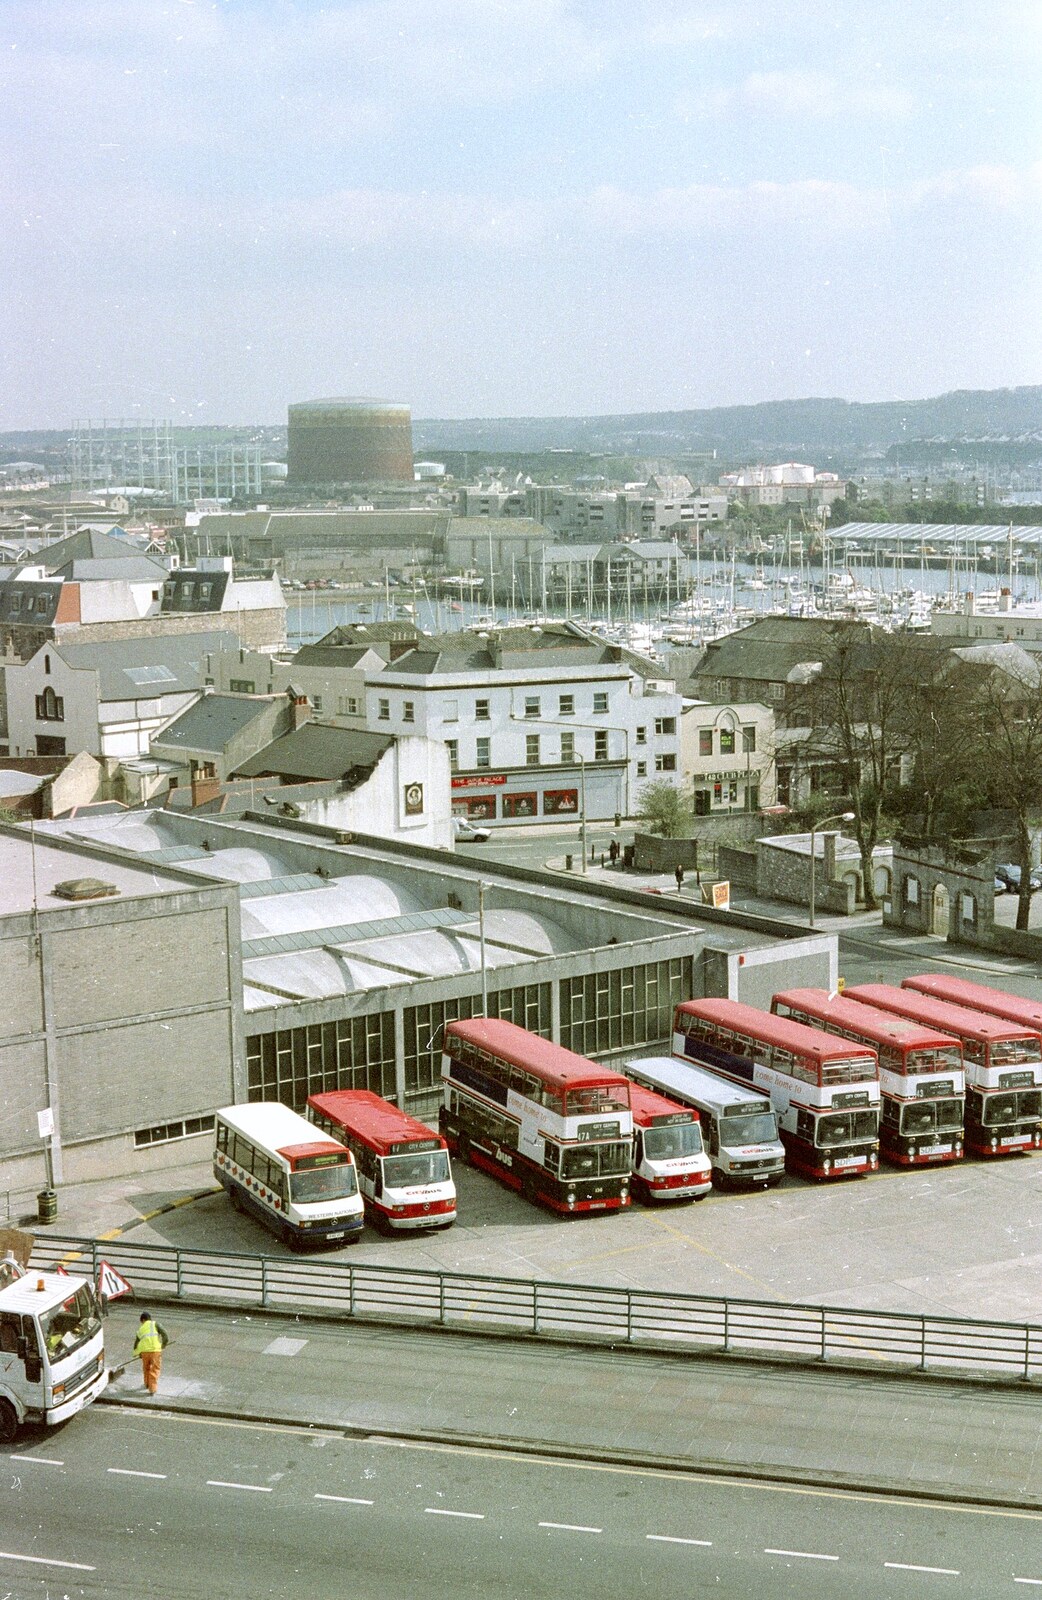 Buses and the Plymstock gasometer from A CISU Trip to Plymouth, Devon - 1st May 1998